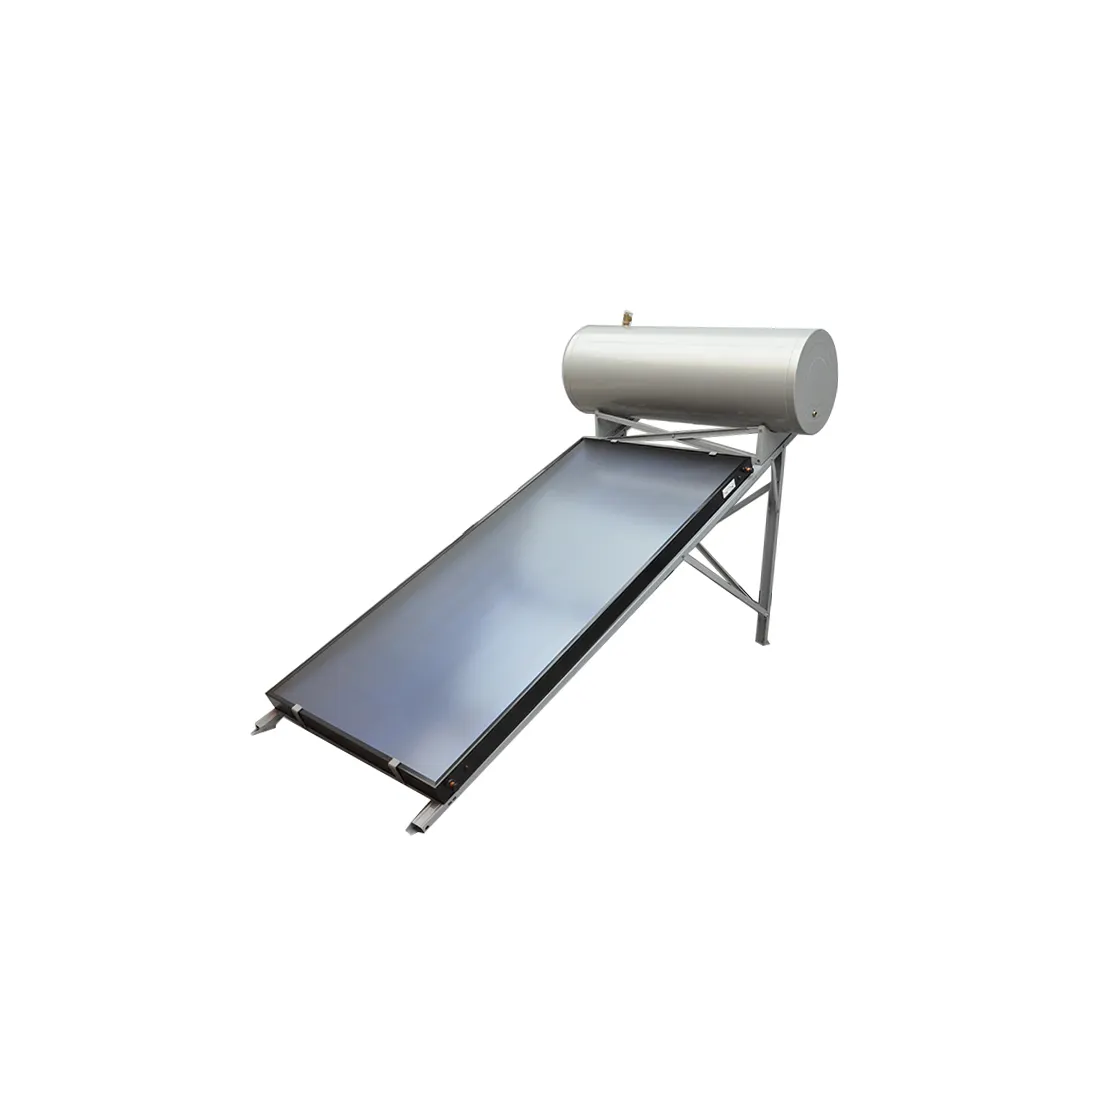 Heat Resisting Flat Plate Solar Collector High Pressure Solar Panel Water Heater Made In China